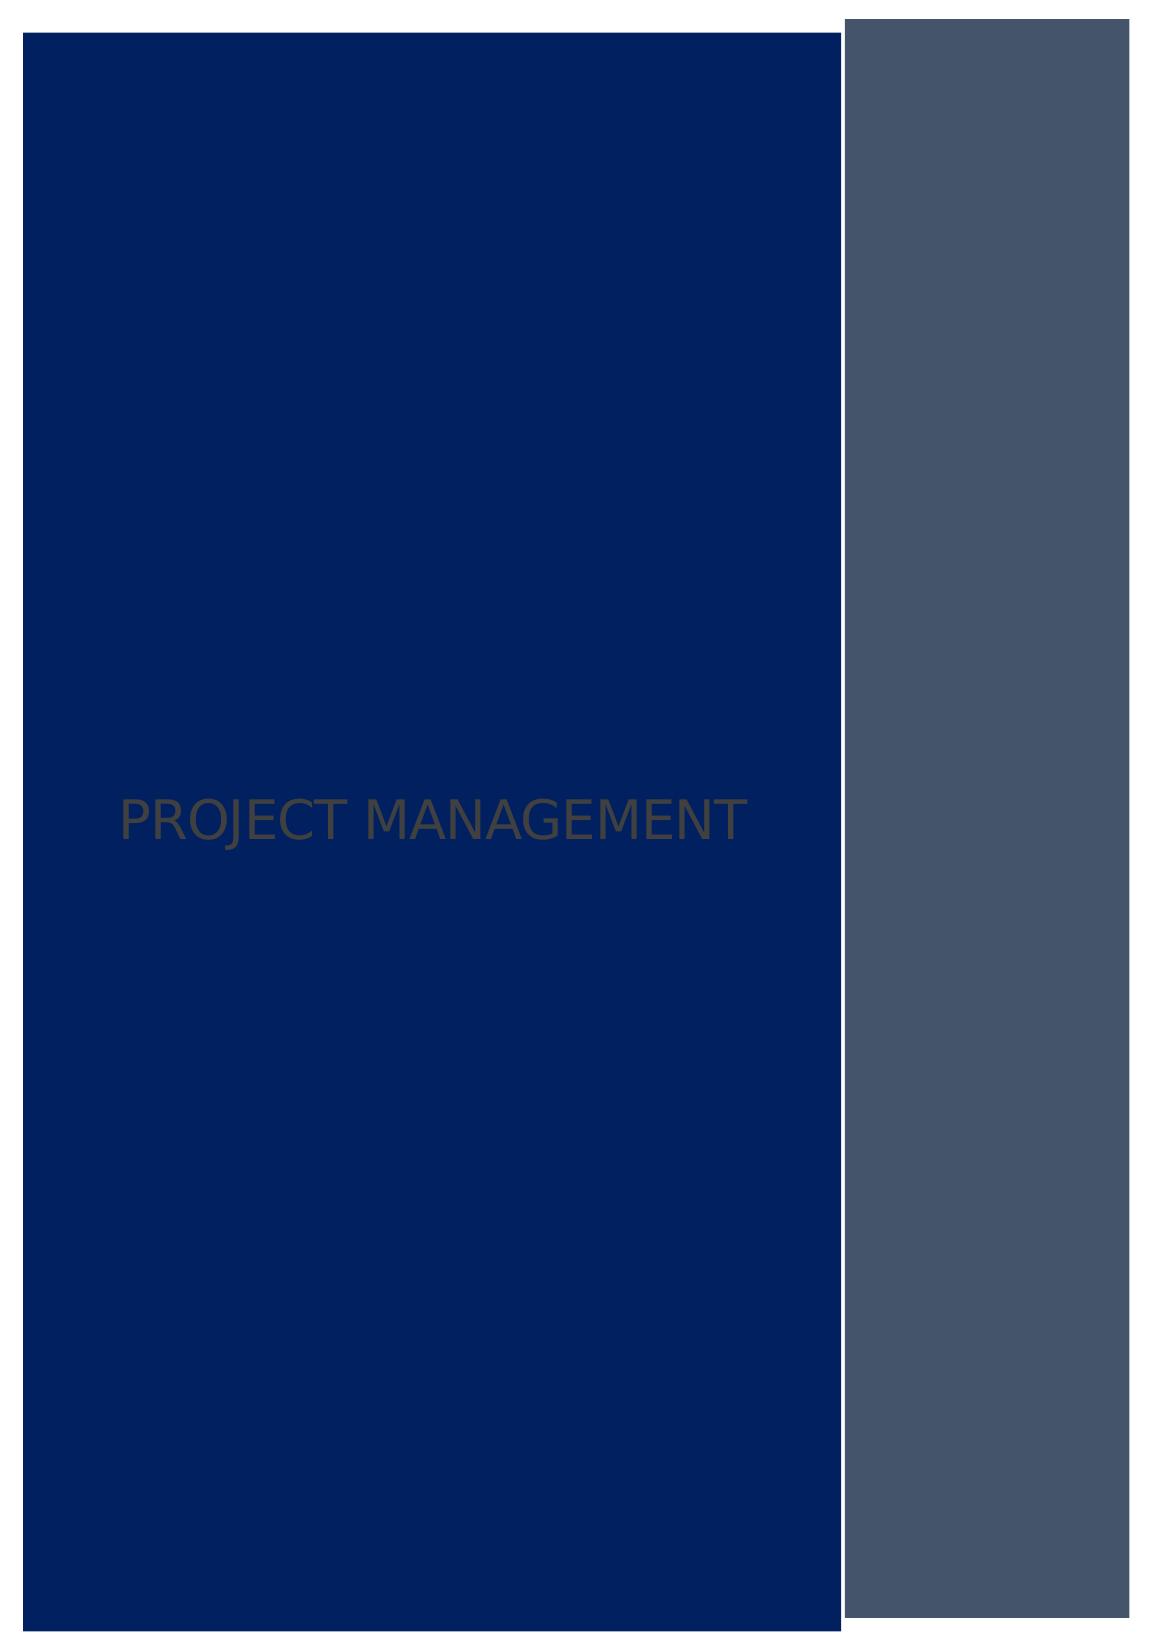 Project Management Assignment | Wireless Warehouse_1